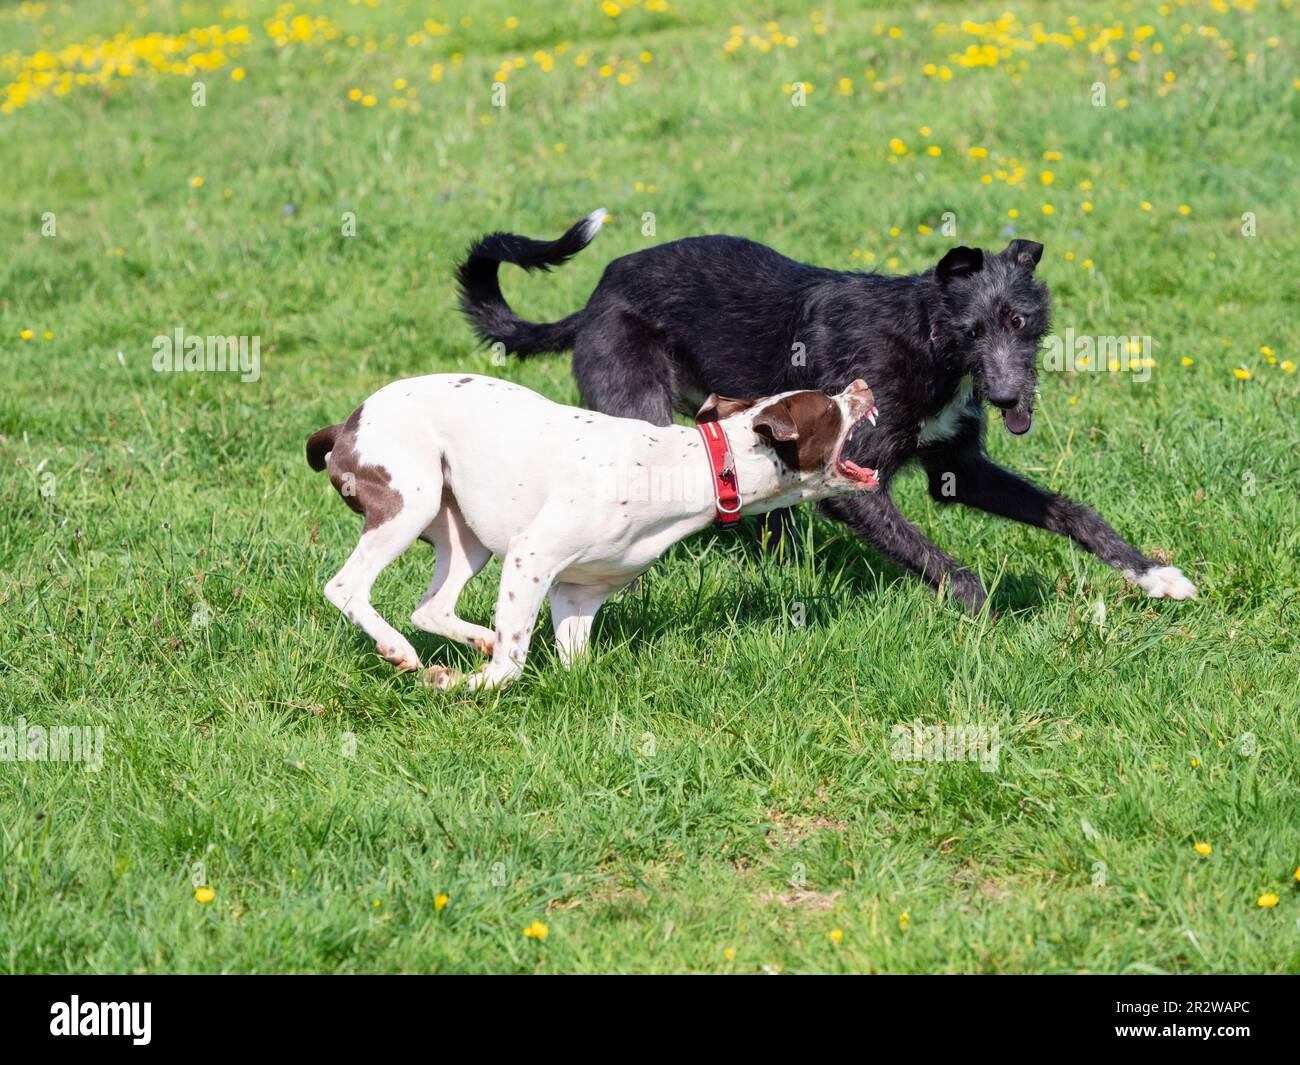 Narla, a Dalmation x Bull Terrier, and Sampson, a deerhound x greyhound, play fighting in a UK meadow Stock Photo